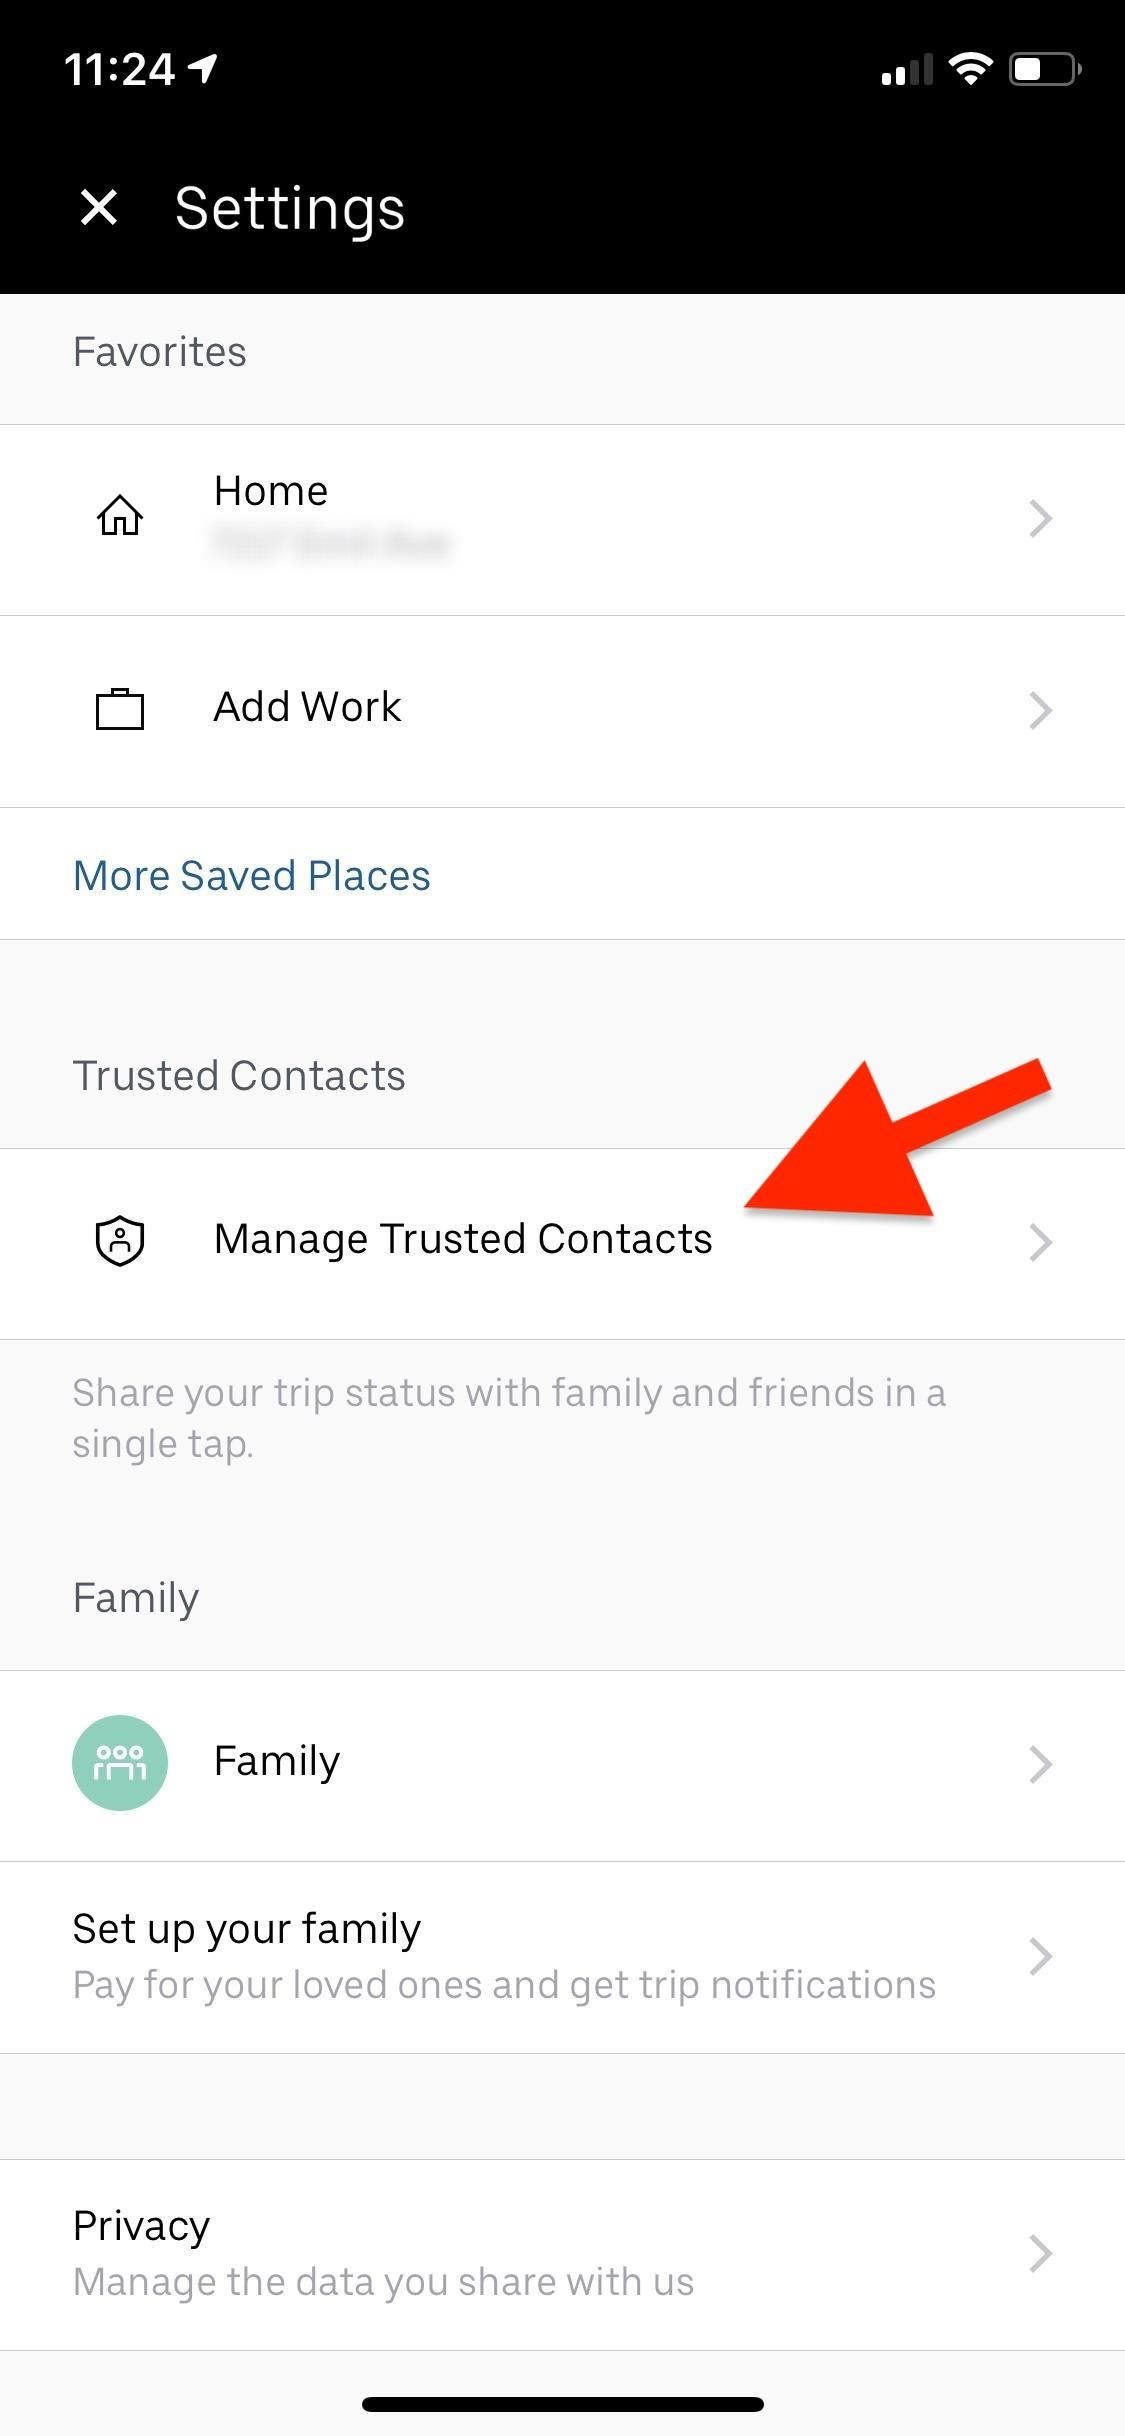 How to Send Your Uber Trip Status to Trusted Contacts if You're Ever in a Sketchy Situation